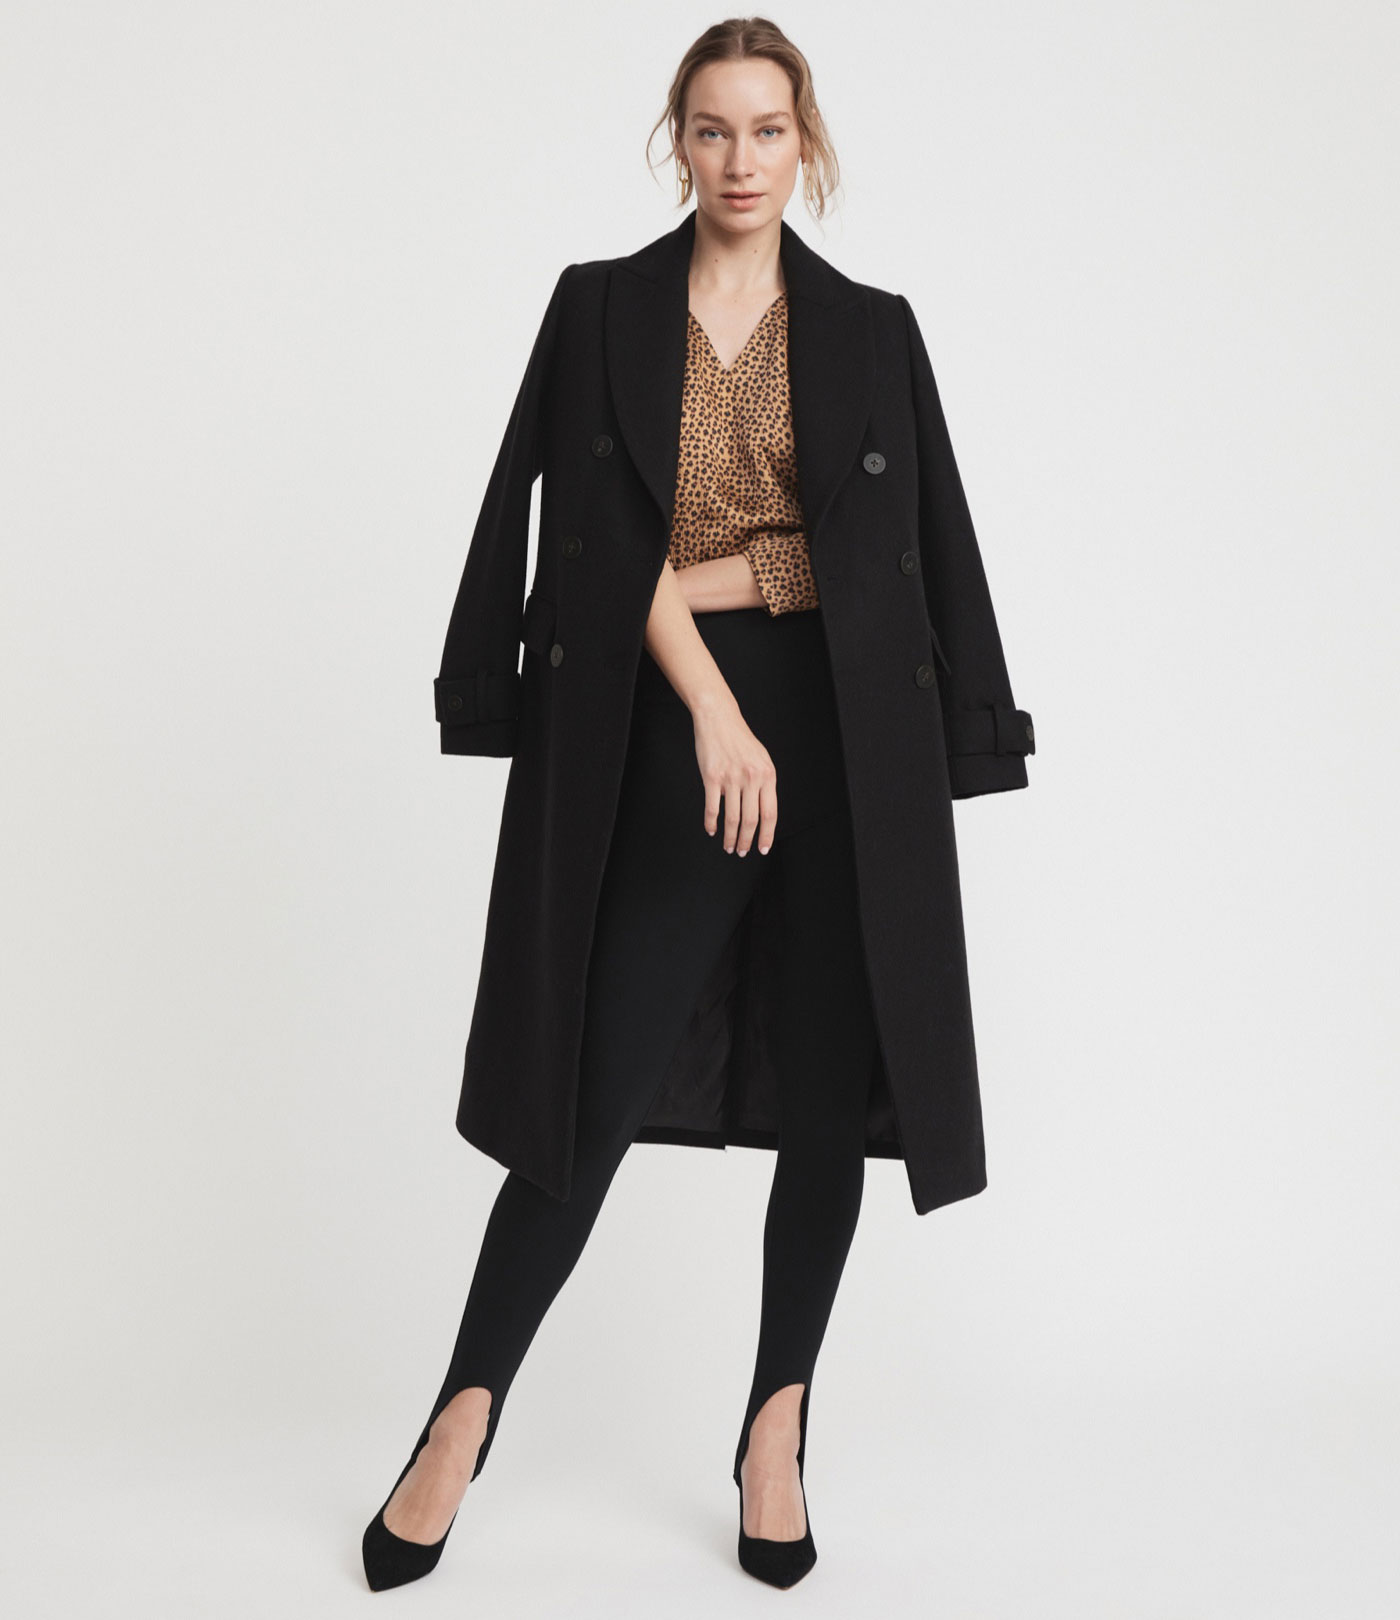 “Winter Elegance: Adding a Touch of Class to Your Cold-Weather Wardrobe”